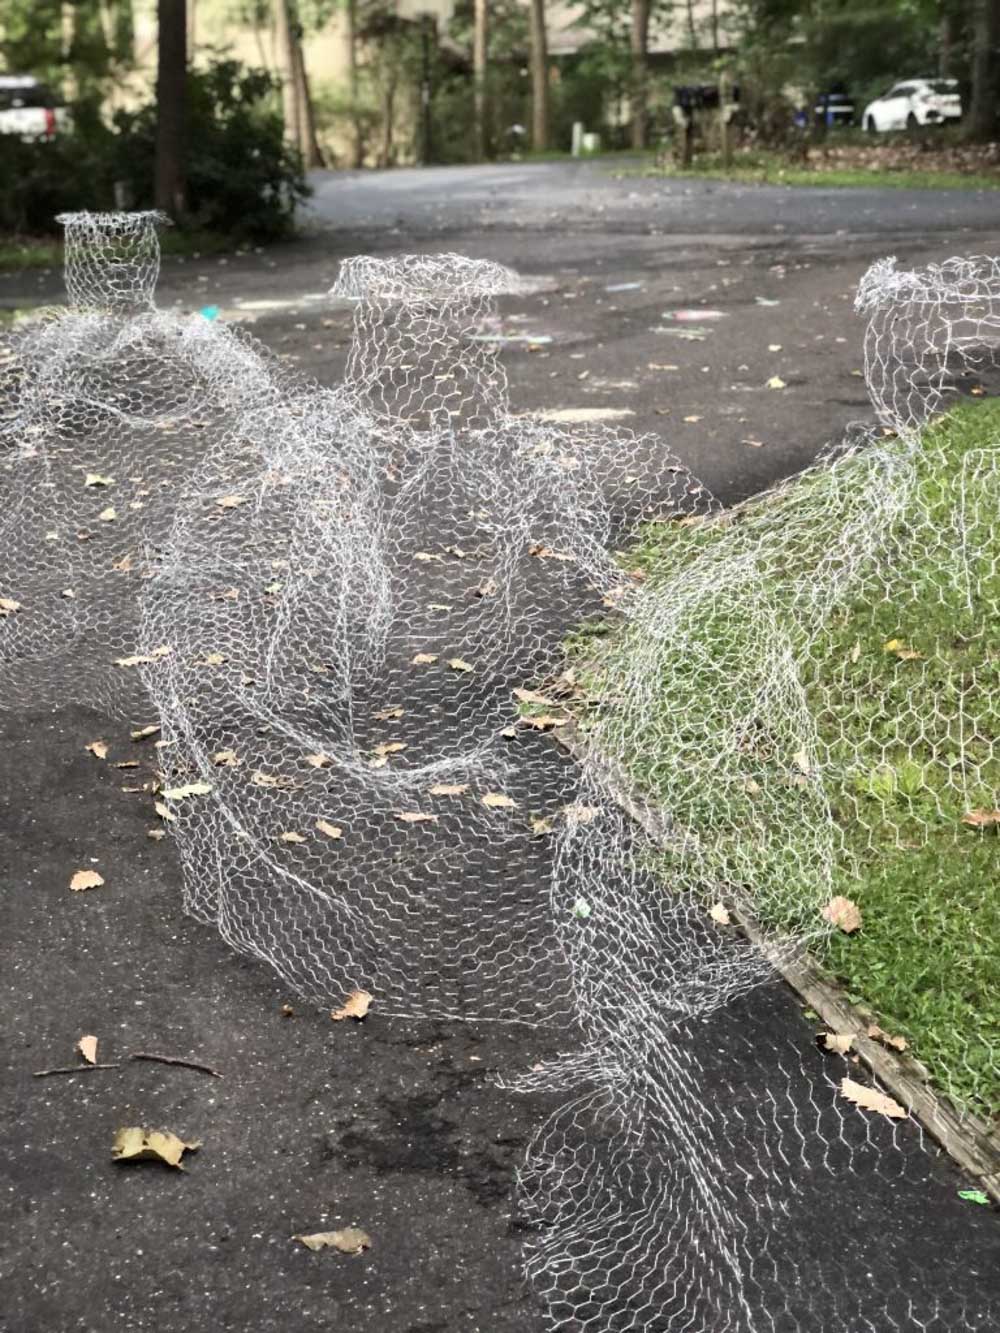 A driveway filled with a group of molded chicken wire.